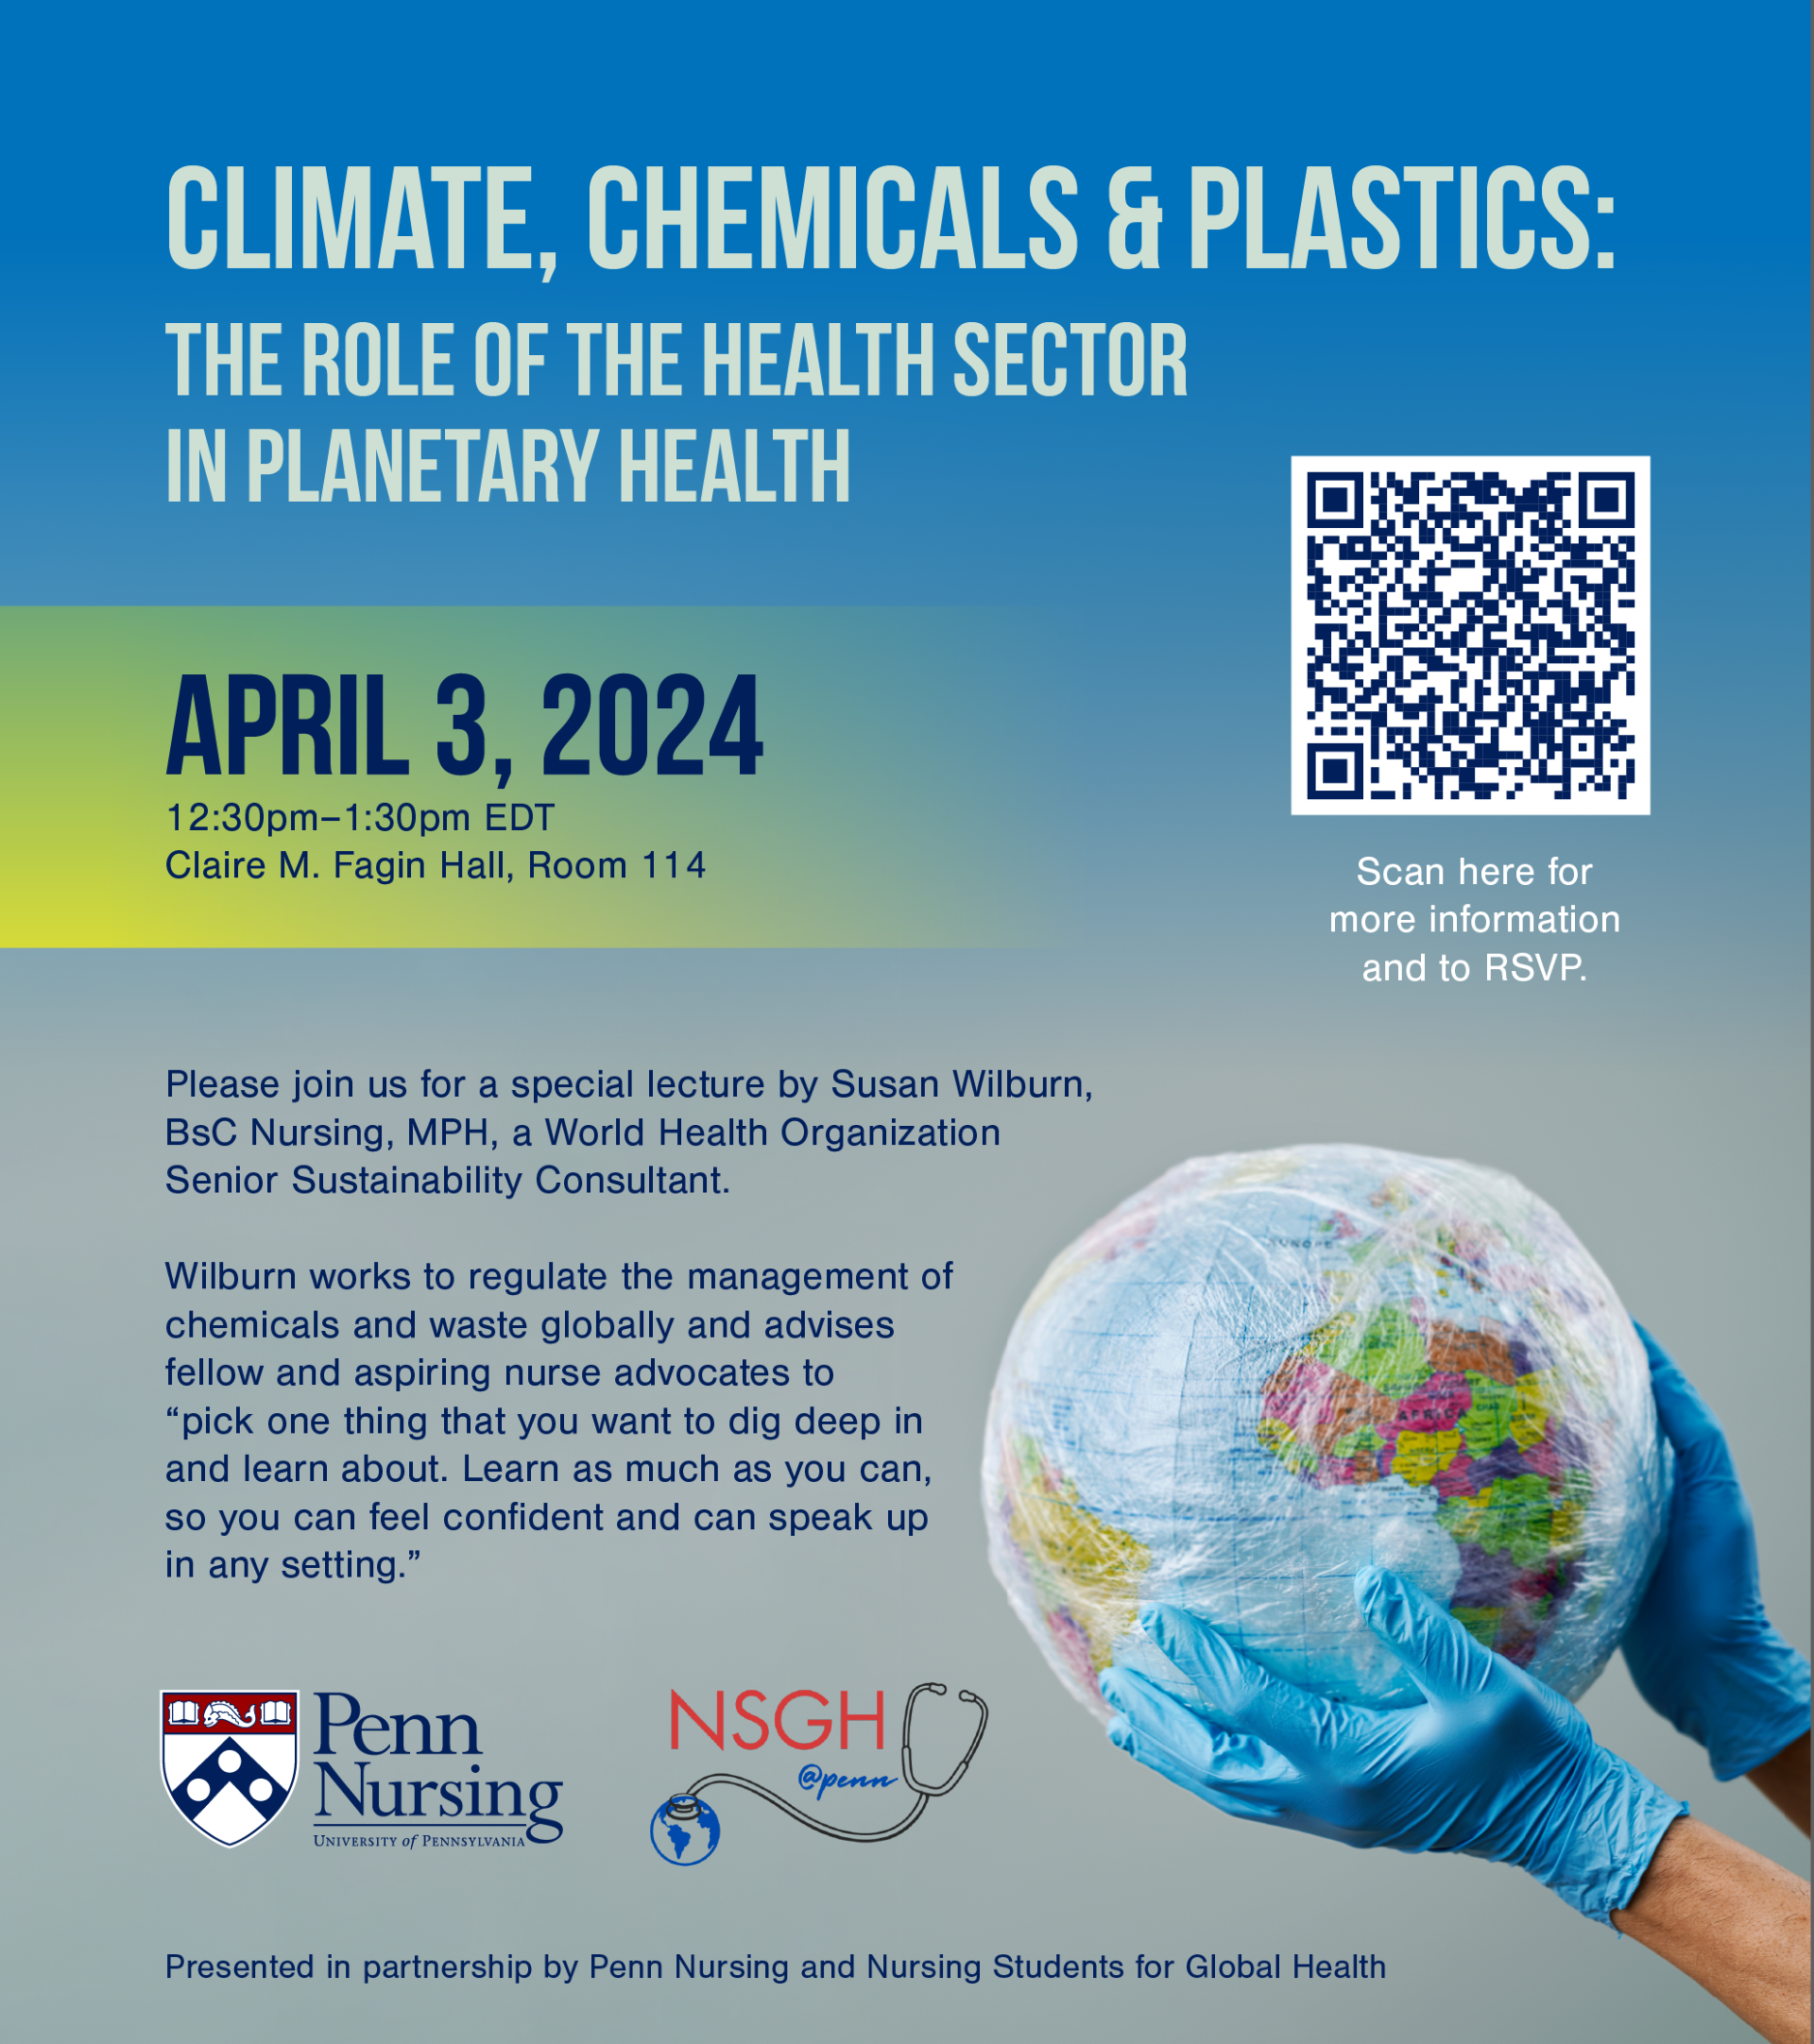 The image showcases the event details of climate, chemicals, and plastics. The event is slated to be April 3, 2024 from 12:30-1:30 in Fagin Hall, Room 114, University of Pennsylvania's Campus. 